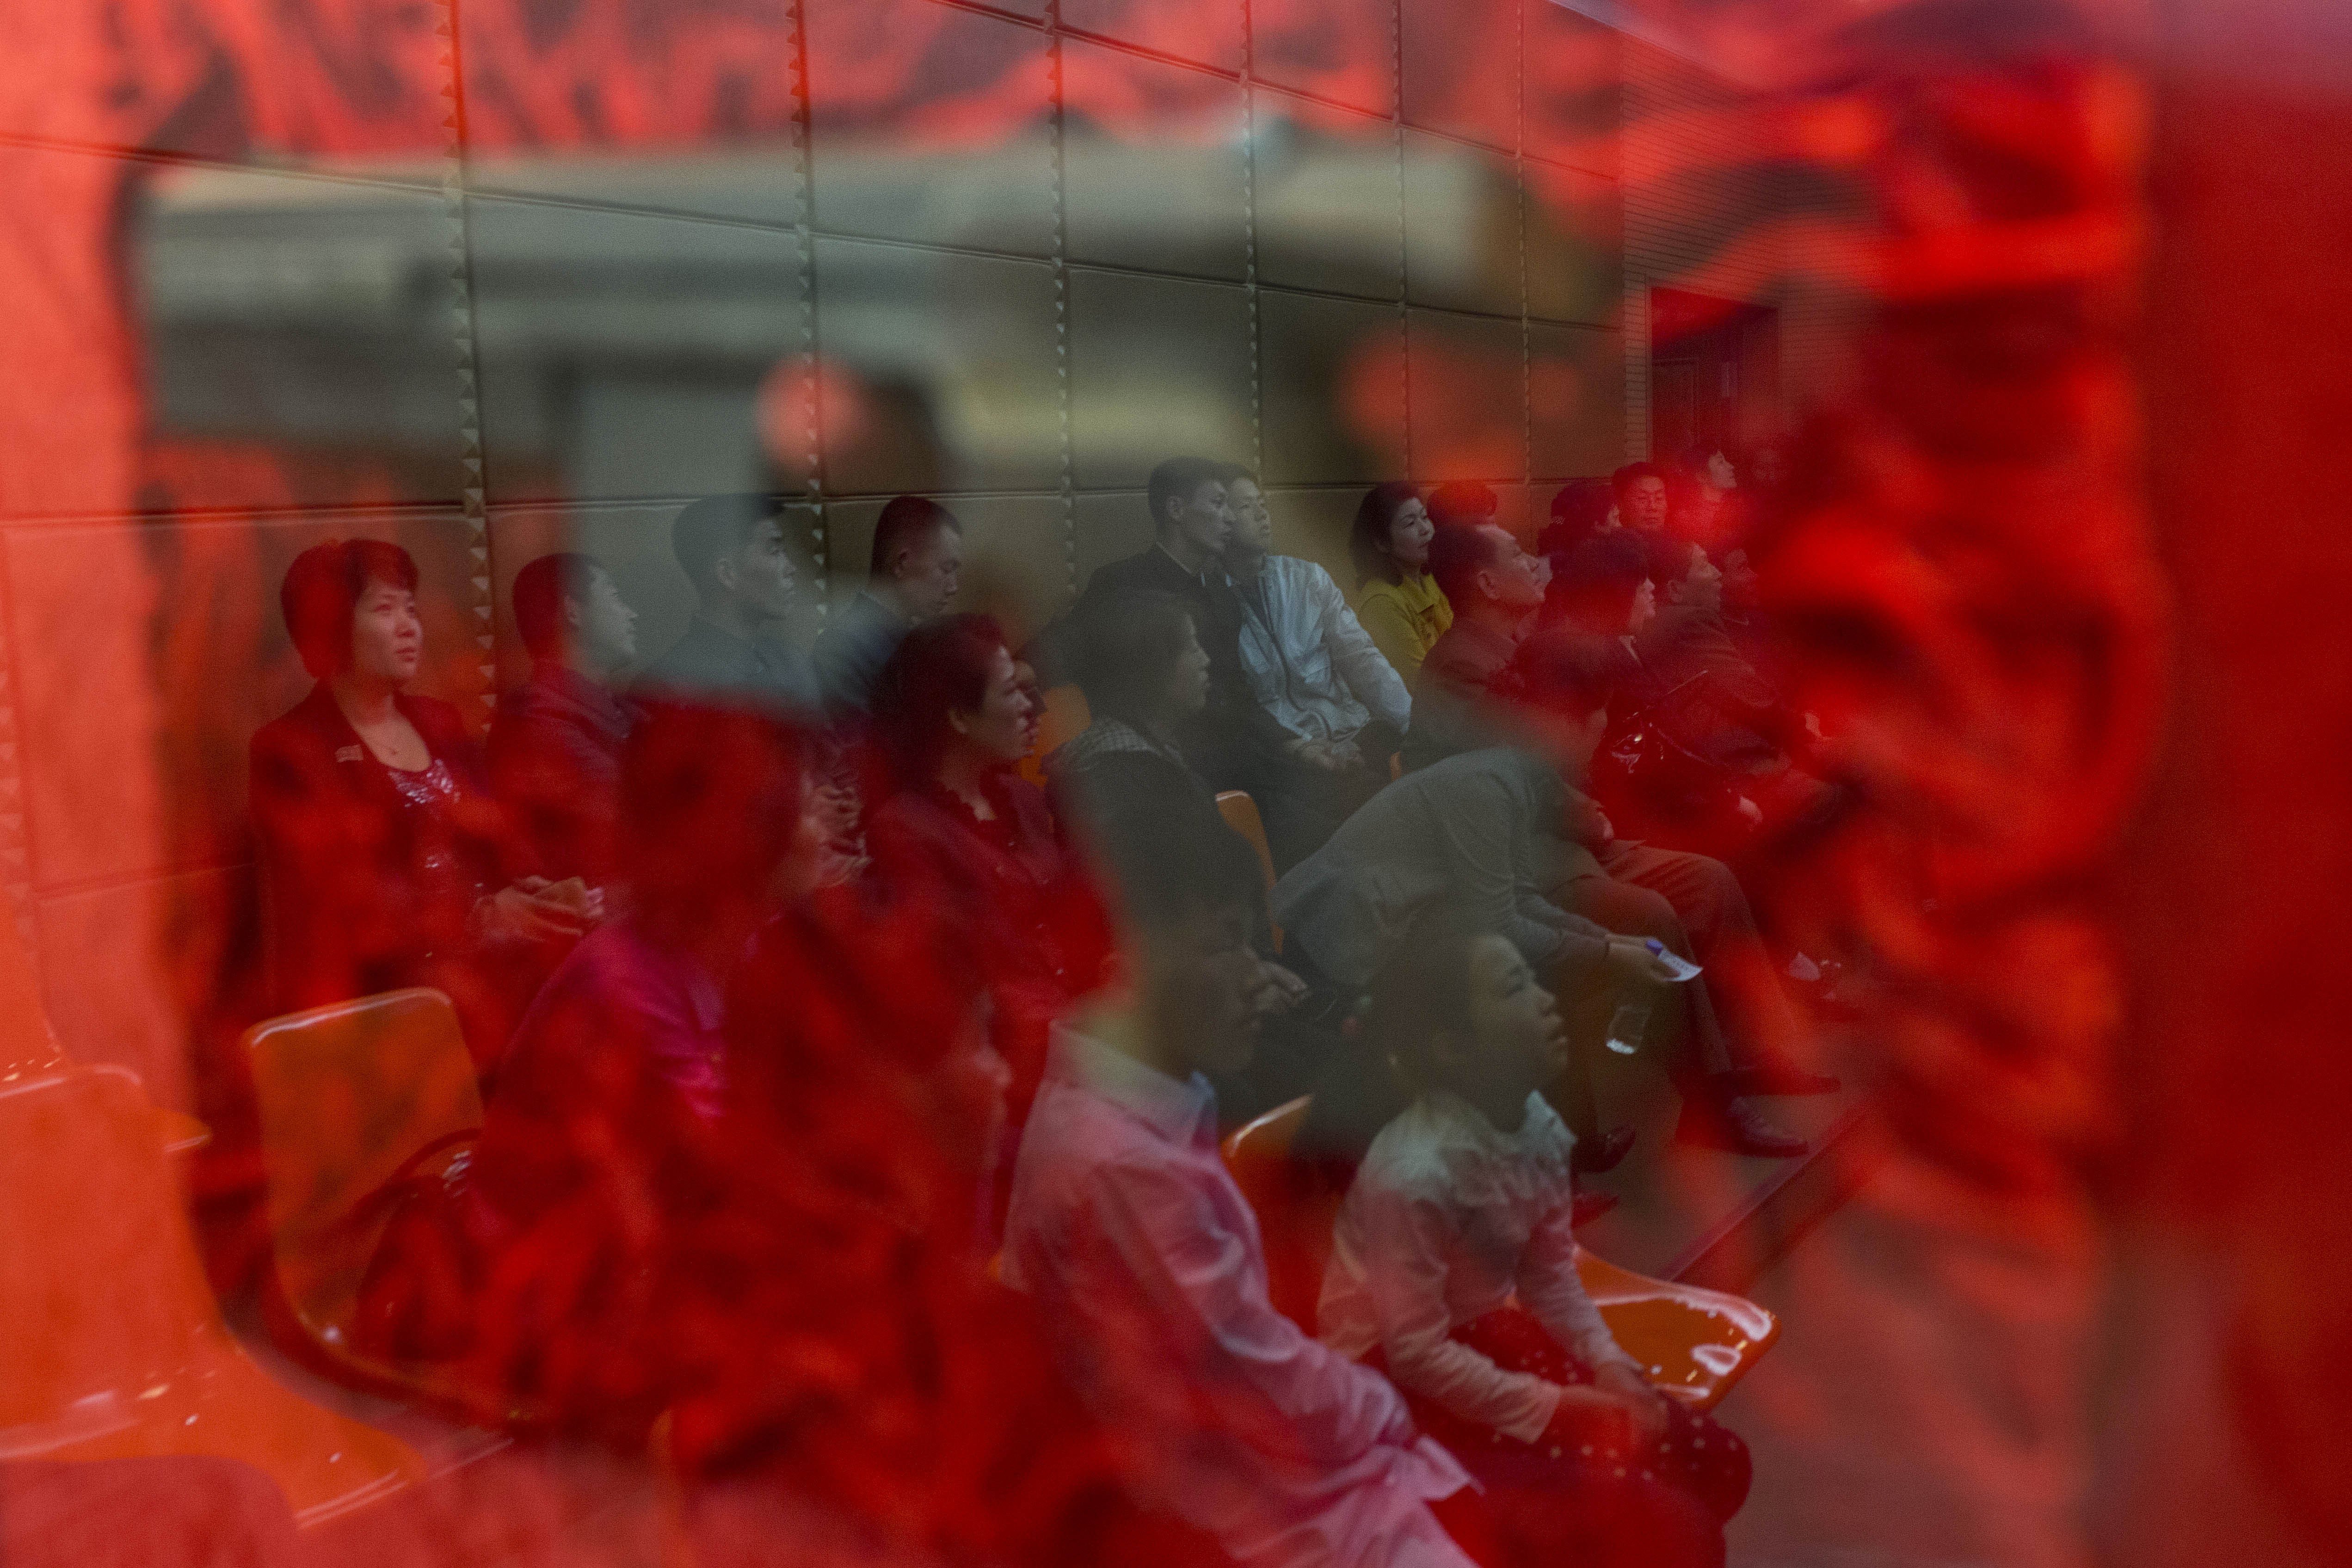 Apr. 16, 2014. North Koreans are reflected in a glass case containing a pistol as they each wait for their turn at a firing range at the Meari Shooting Gallery in Pyongyang. Employees at the firing range said the pistol on display had been used by North Korean leaders Kim Jong Il and Kim Jong Un when each toured the facility in the past.